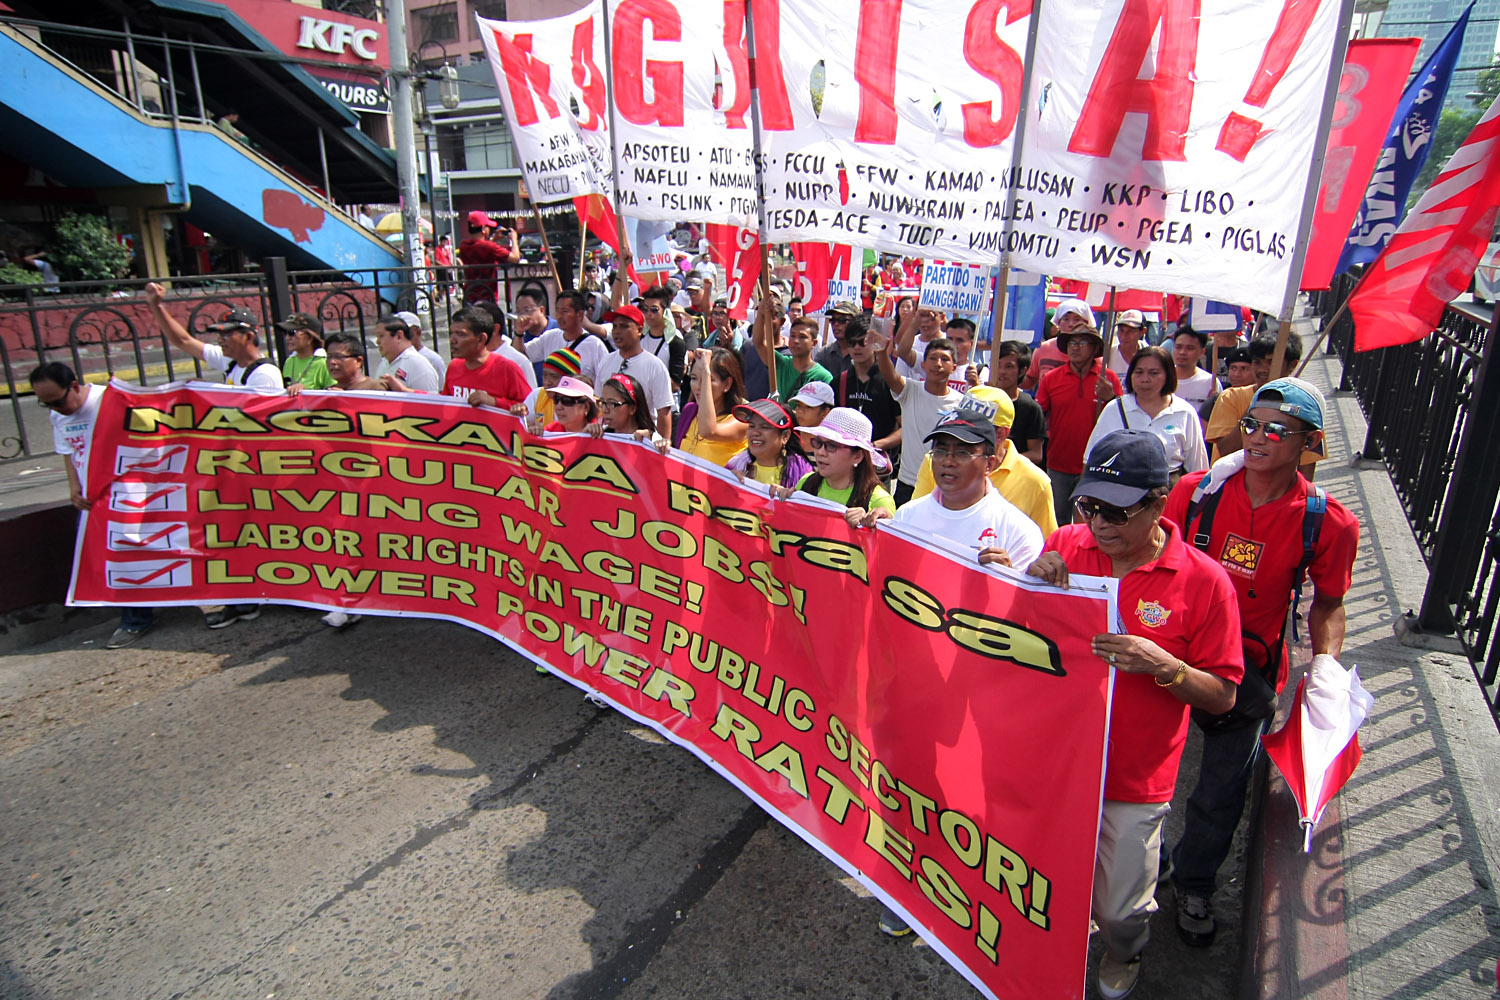 Senatoriables steal labor day limelight, as workers push wage hike